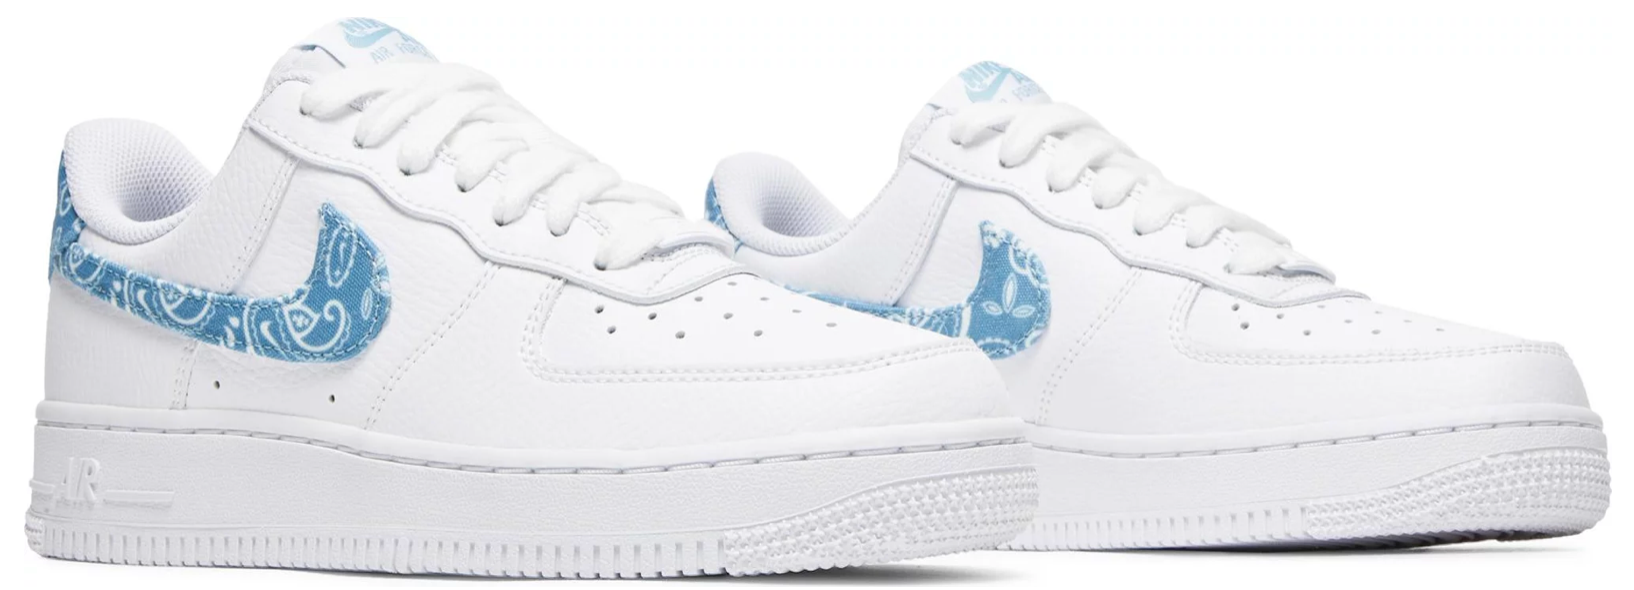 NIKE AIR FORCE 1 LOW '07 ESSENTIAL WHITE WORN BLUE PAISLEY (W)